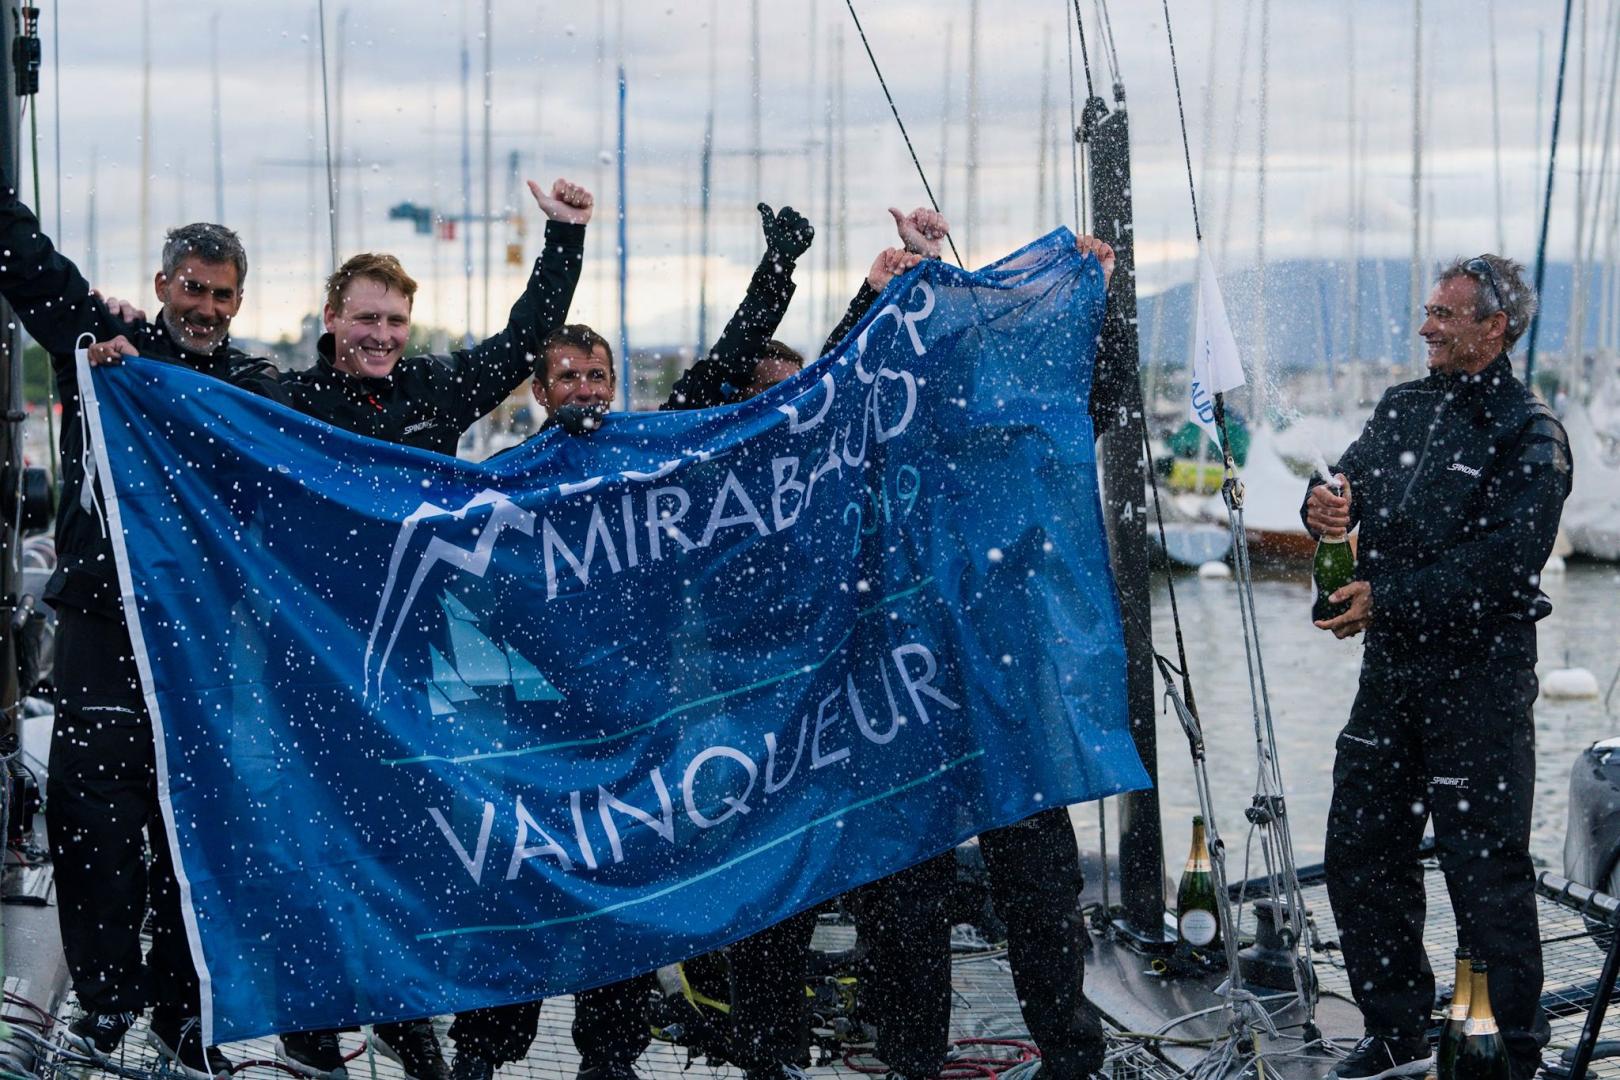 Yann Guichard and the Ladycat Team win the 2019 Mirabaud Bol d'Or 2019